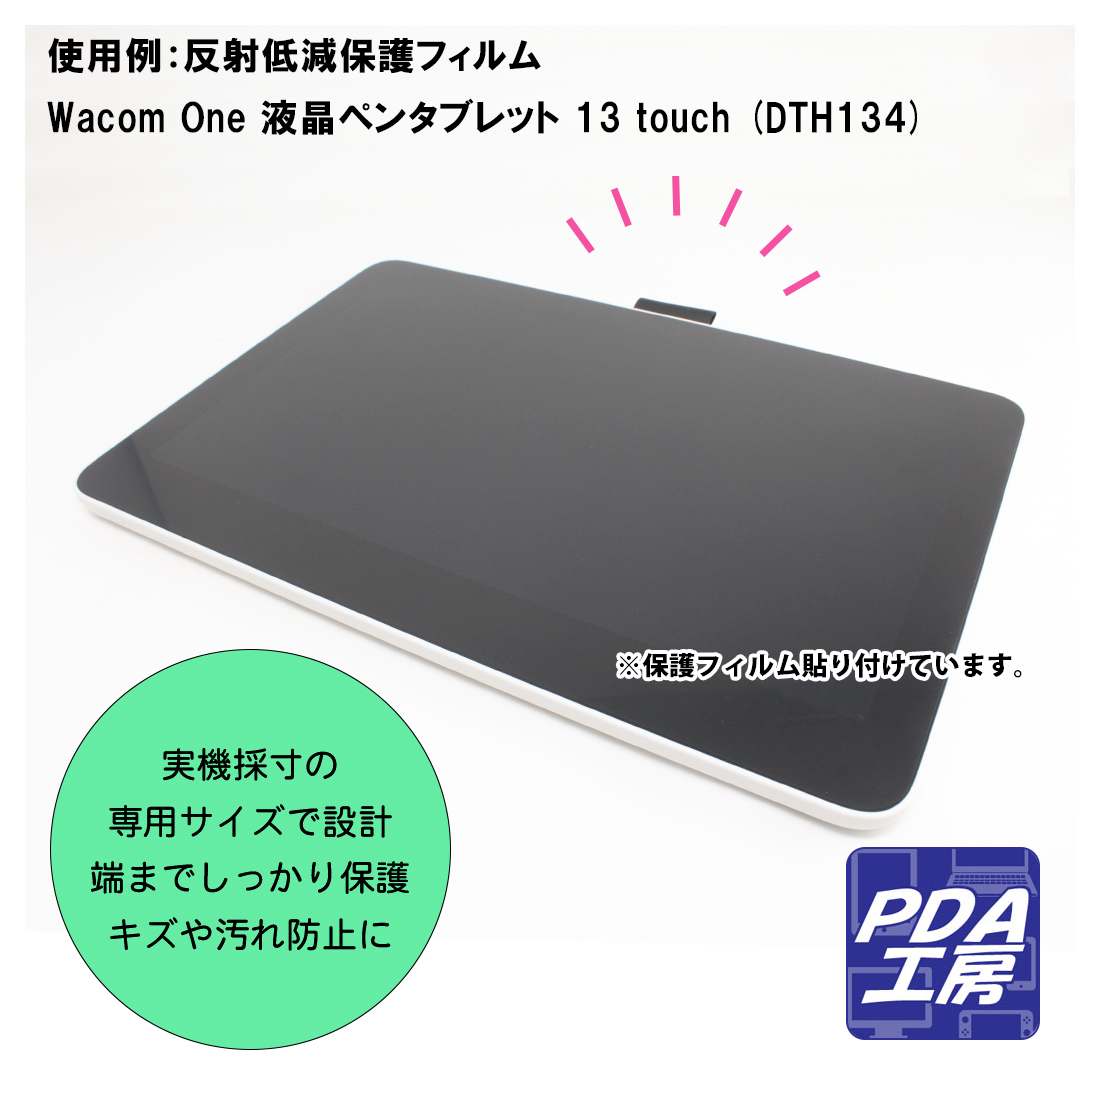 Wacom One 液晶ペンタブレット 13 touch (DTH134) 対応 Perfect Shield 保護 フィルム 反射低減 防指紋 日本製｜pdar｜03